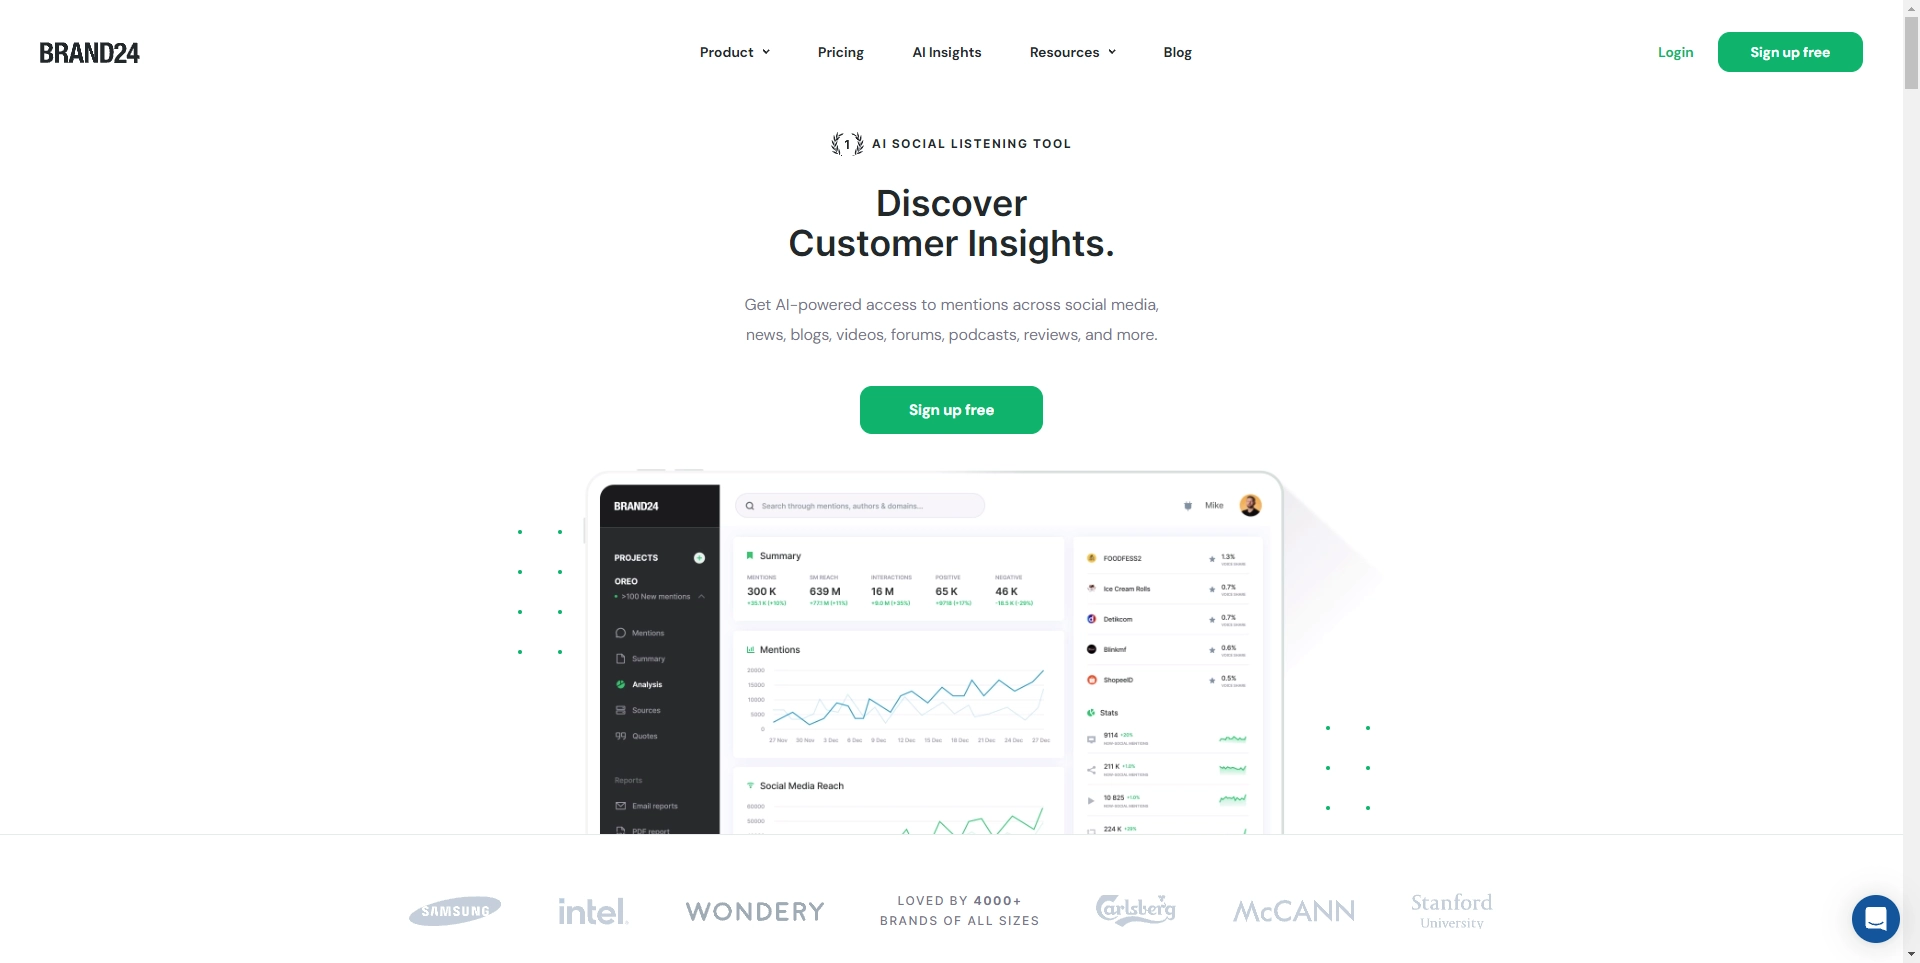 Brand24 landing page showing a visual and text describing customer insights